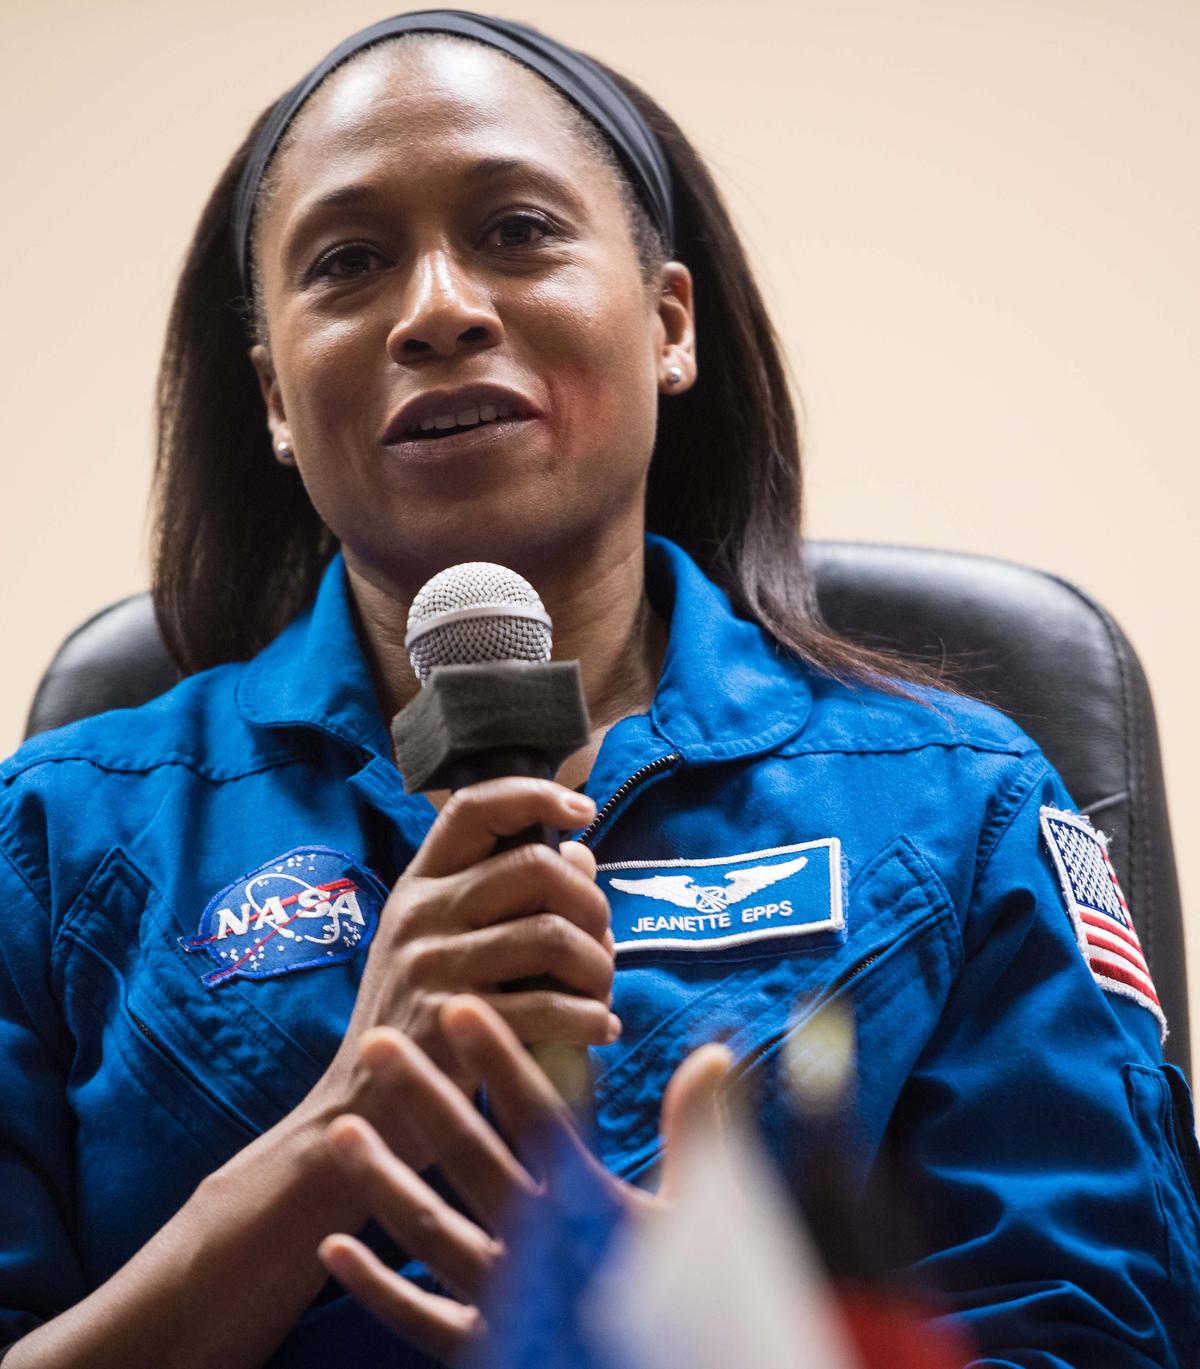 Jeanette Epps will join astronauts Sunita Williams and Josh Cassada on a 2021 mission aboard a Boeing-built Starliner. (Joel Kowsky/NASA)